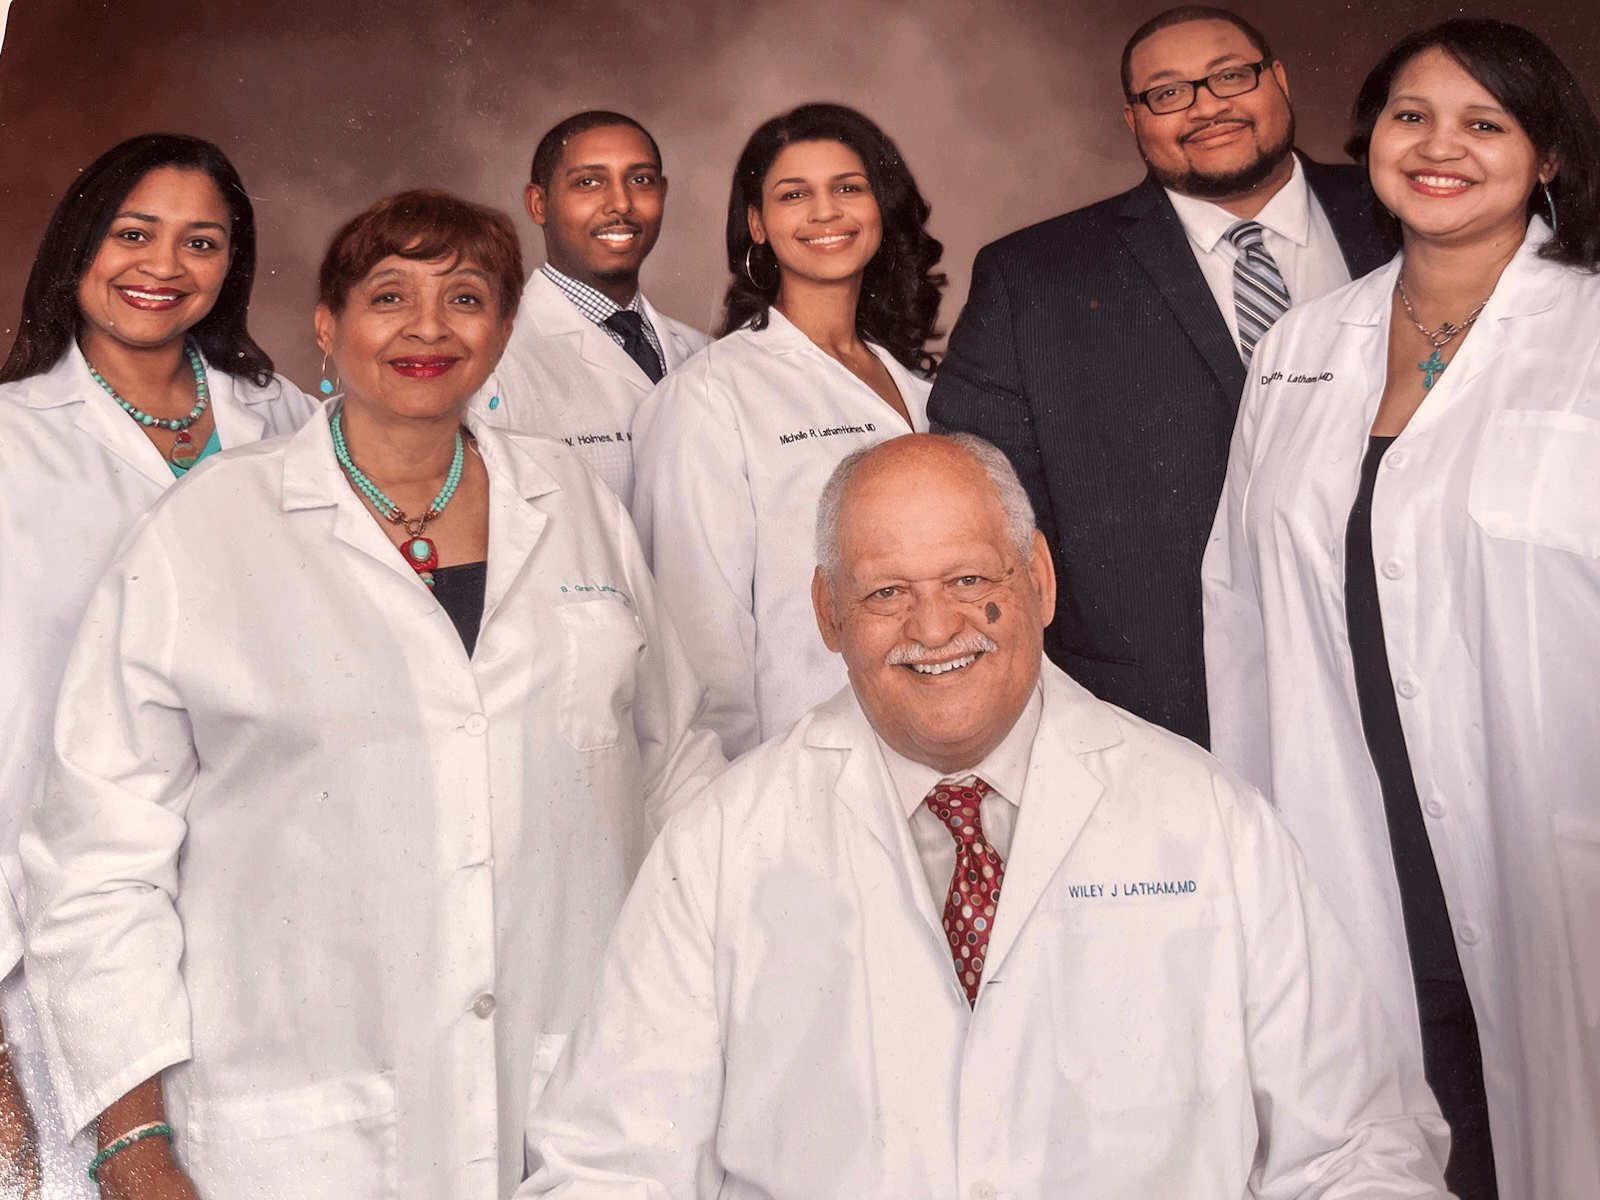 Dr. Latham-Solomon and her family, who are also physicians!